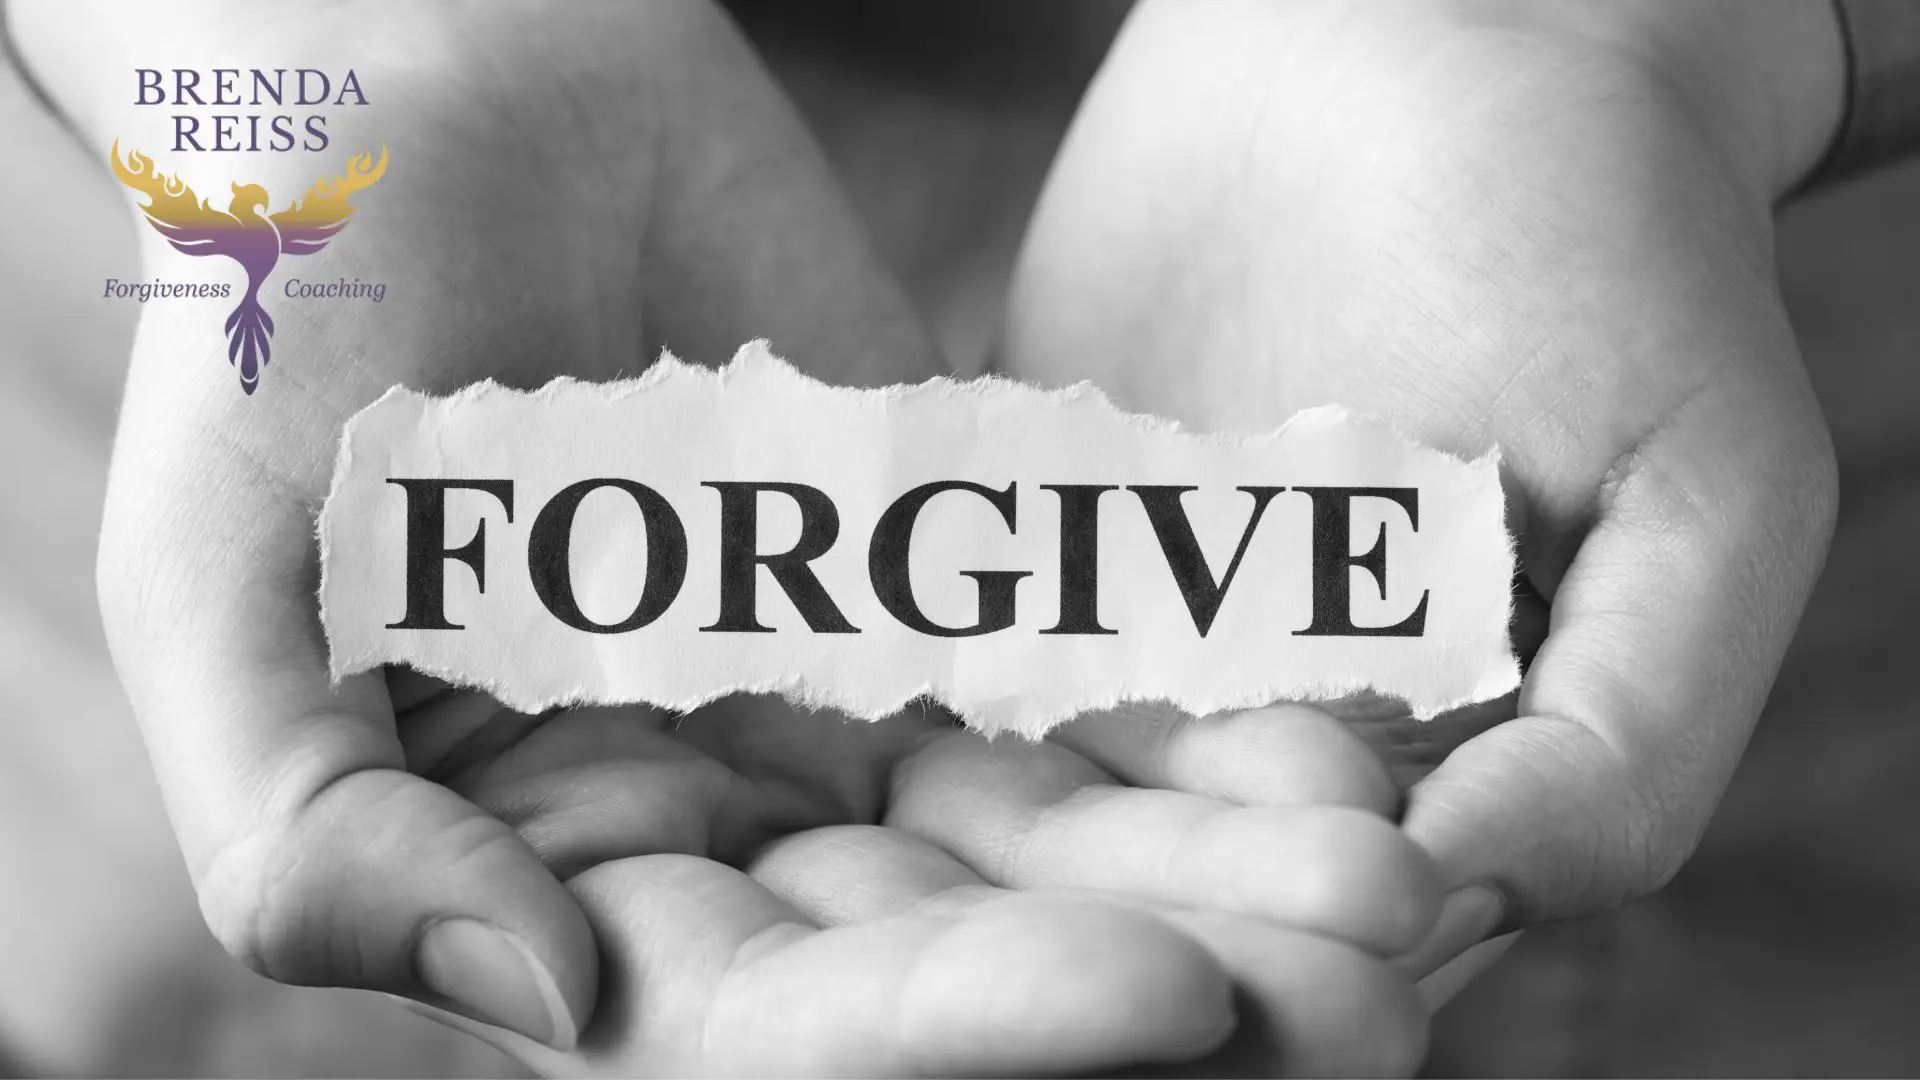 A Beginner’s Guide to Self-Forgiveness